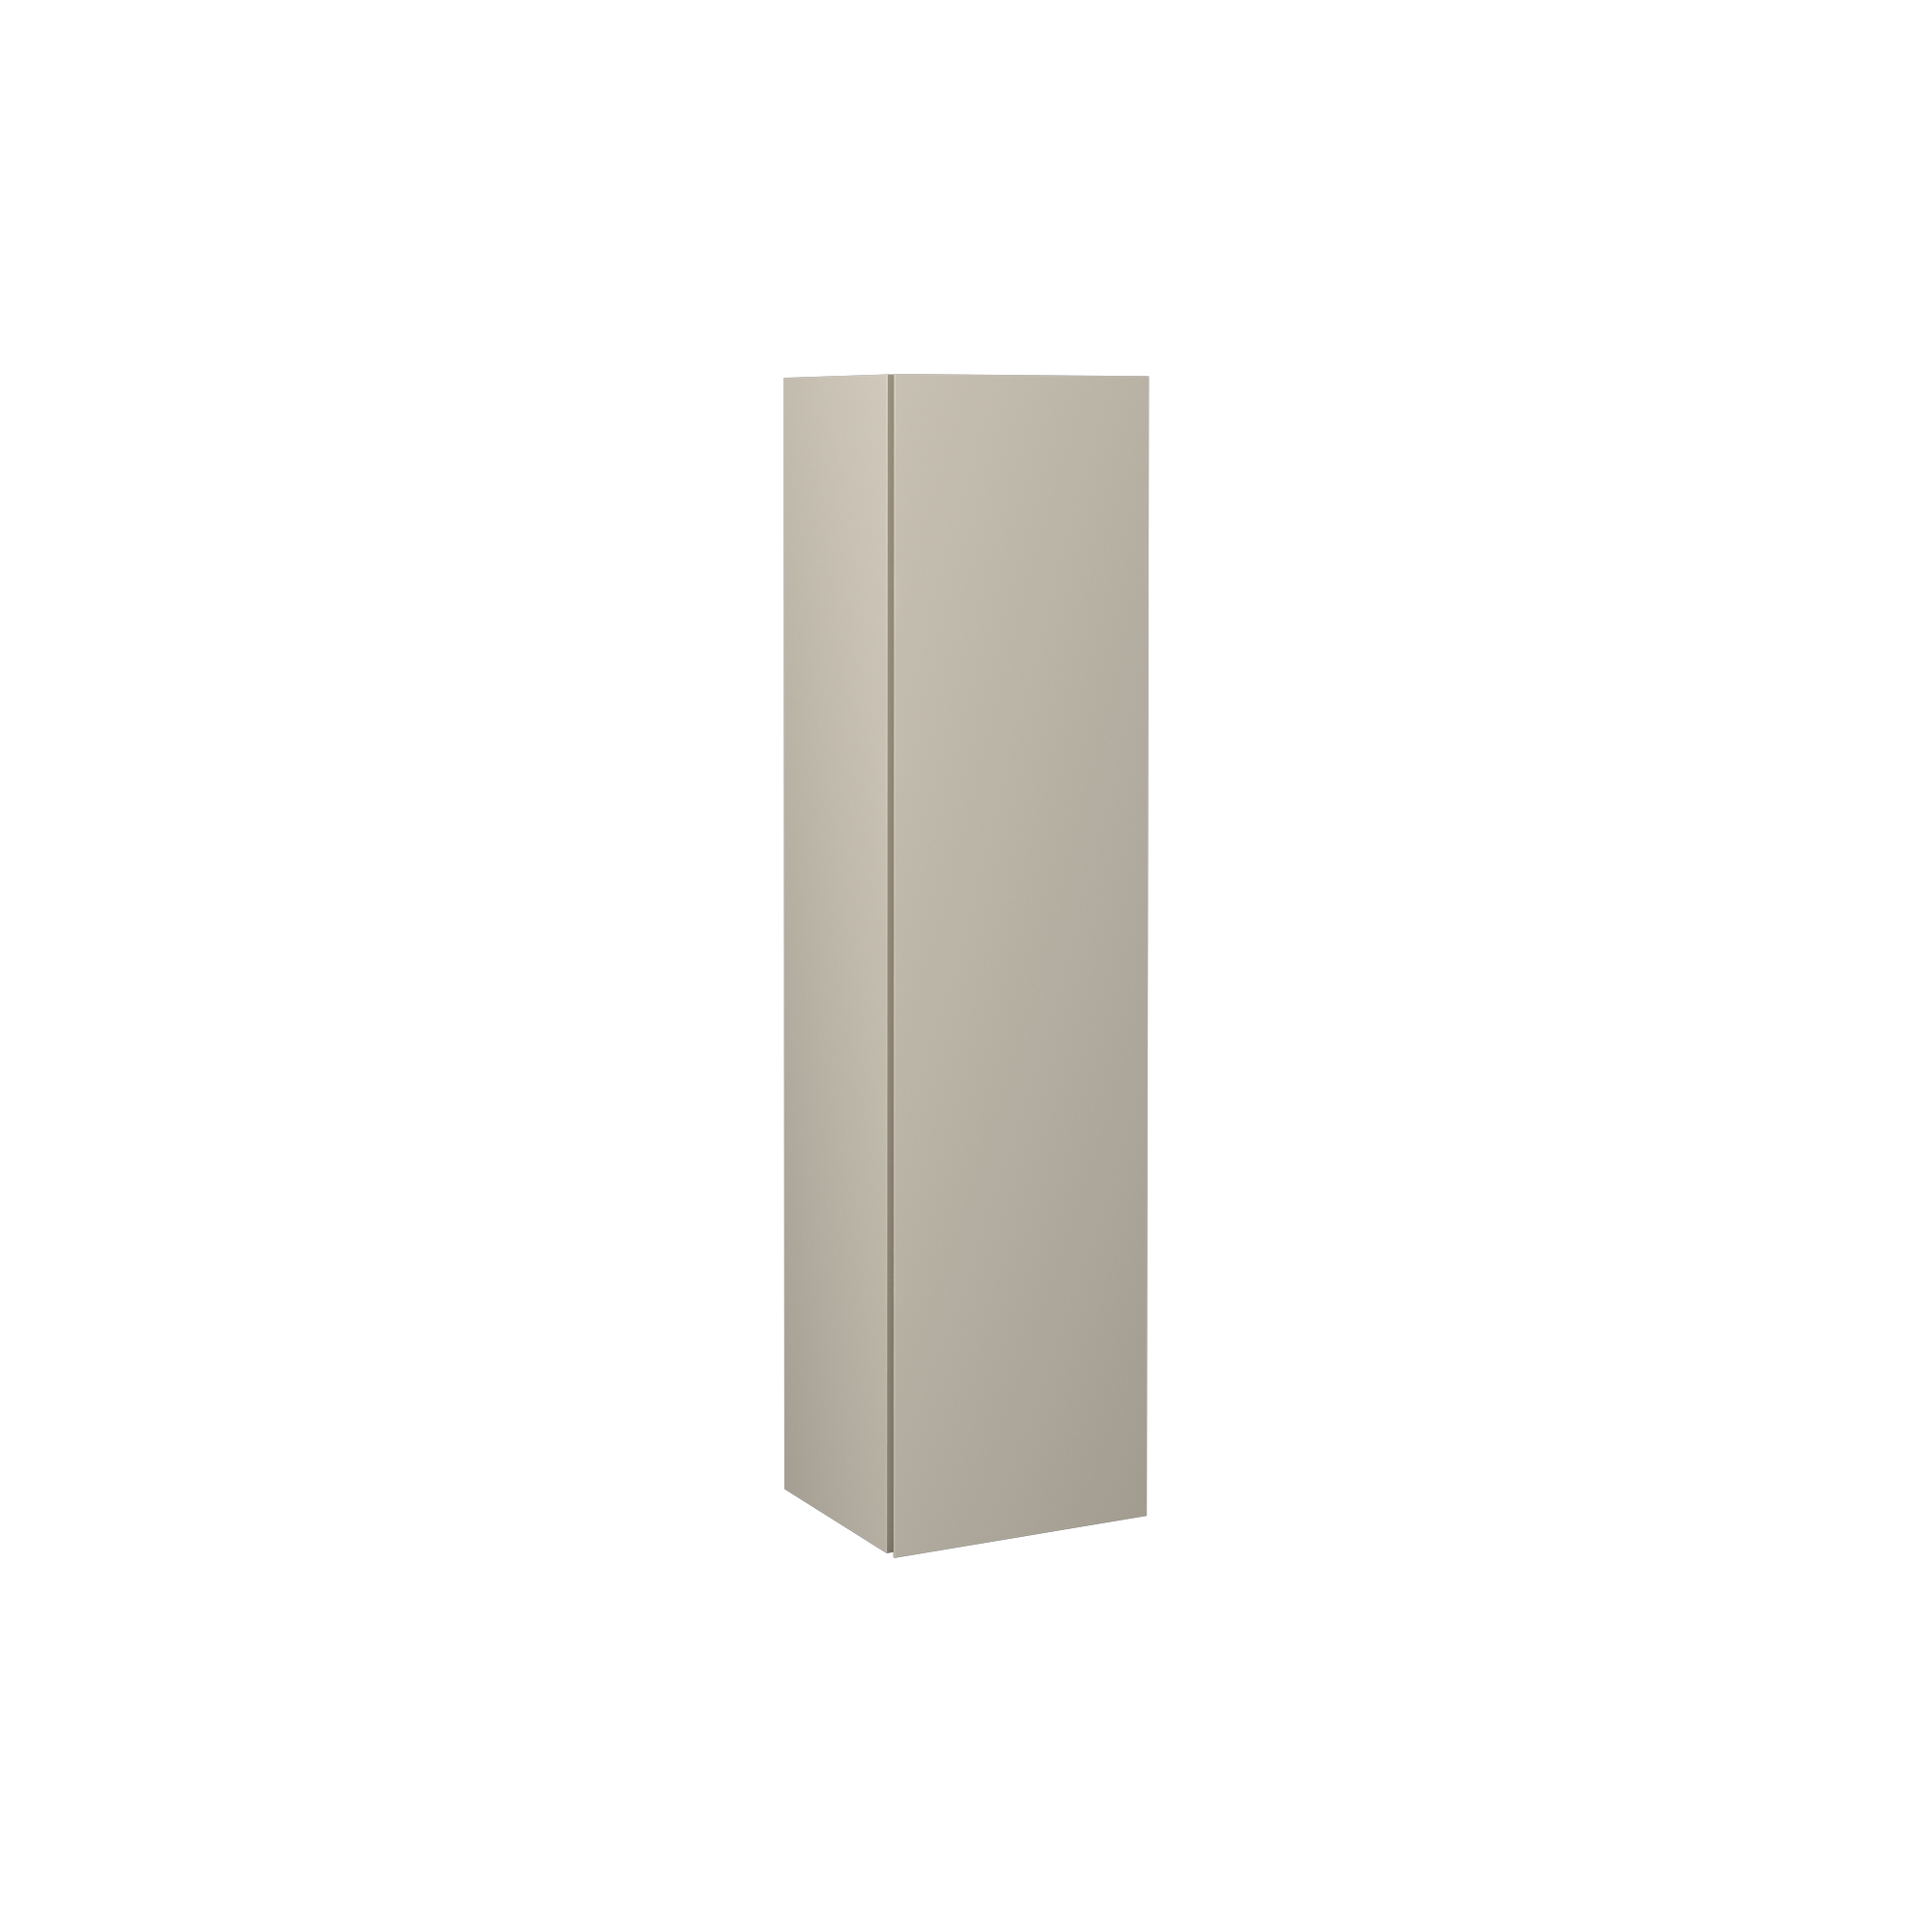 Pro 14" Tall Cabinet, Sand Beige Left